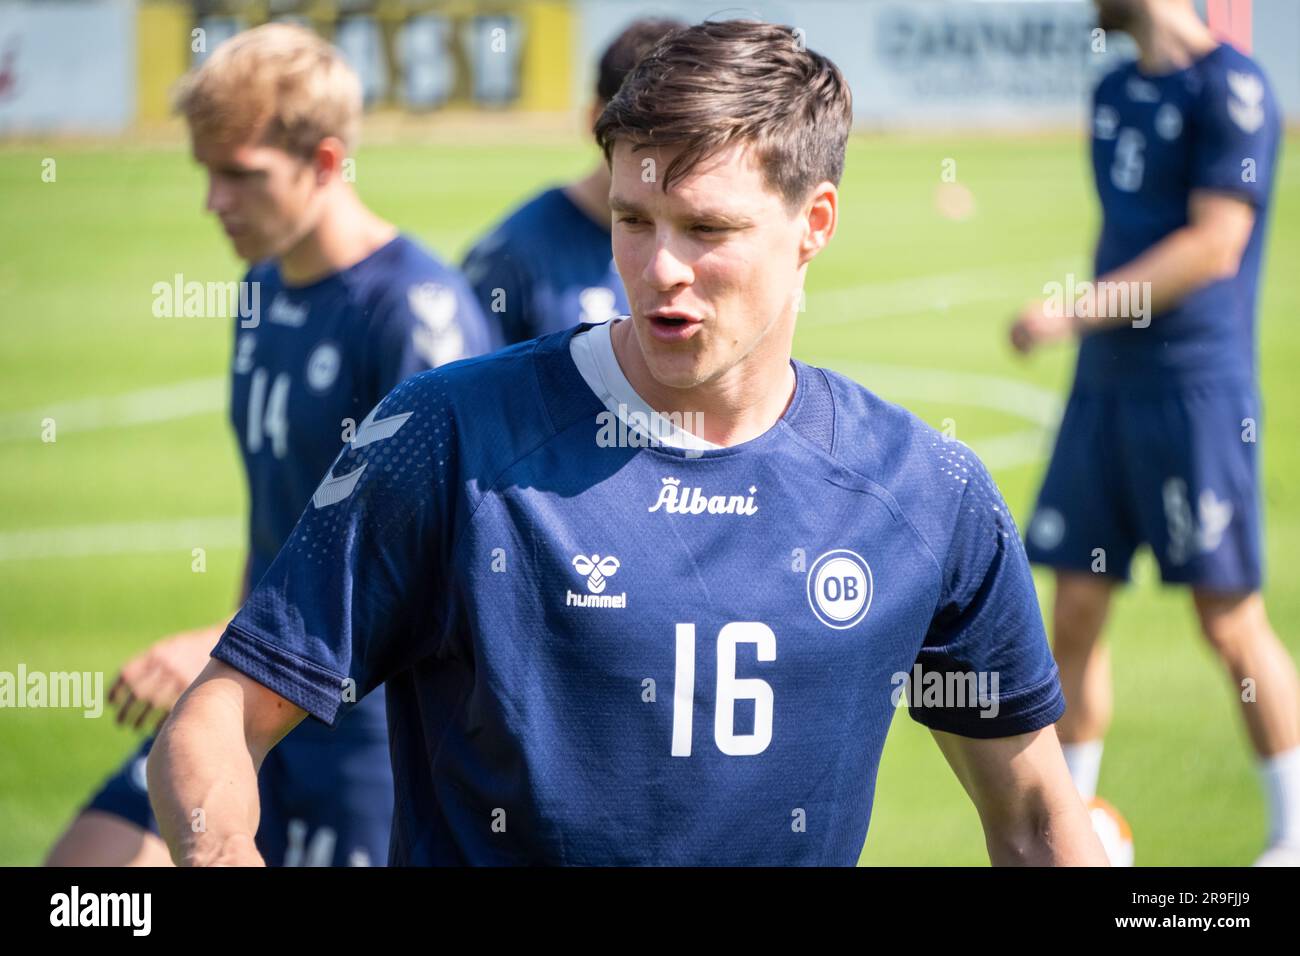 Odense, Denmark. 26th June, 2023. Sauli Väisänen (16) of Odense BK seen during a training session as part of the pre-season of the Danish Superliga club Odense Boldklub at the training site Aadalen in Odense. (Photo Credit: Gonzales Photo/Alamy Live News Stock Photo